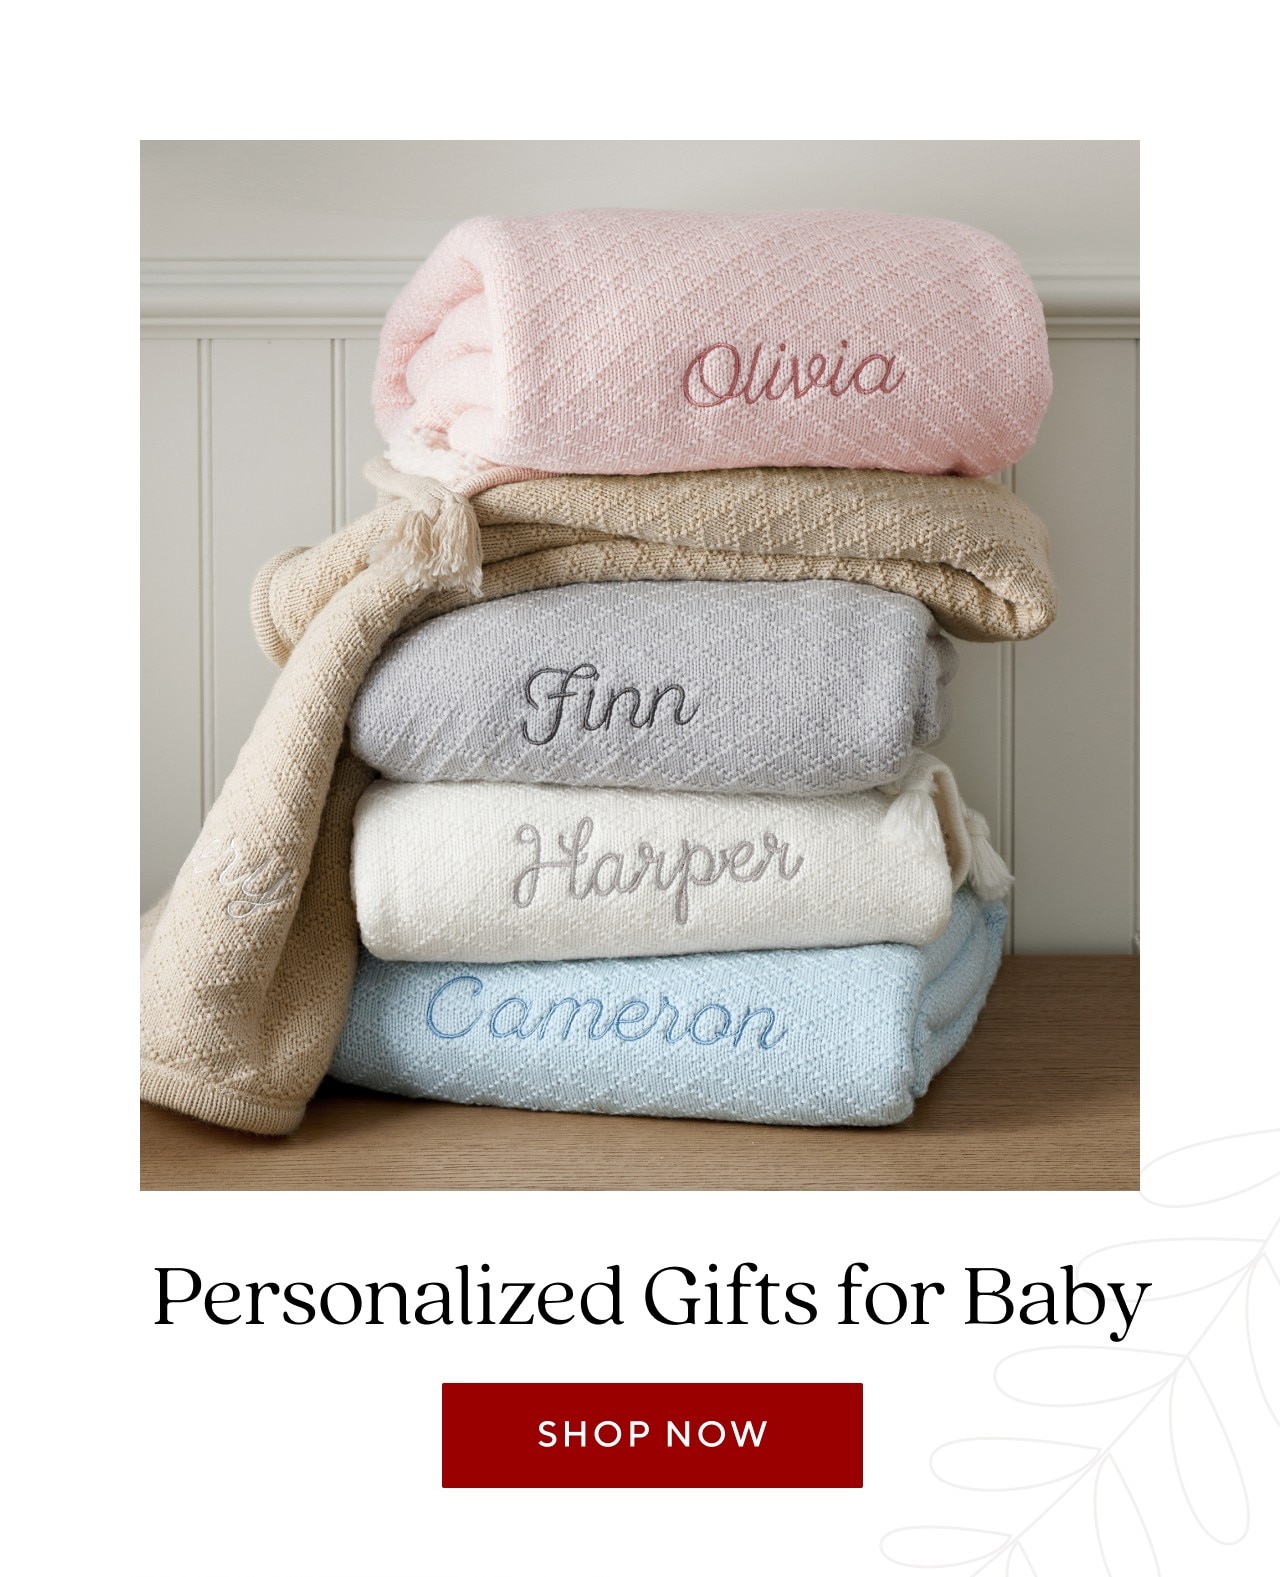 PERSONALIZED GIFTS FOR BABY